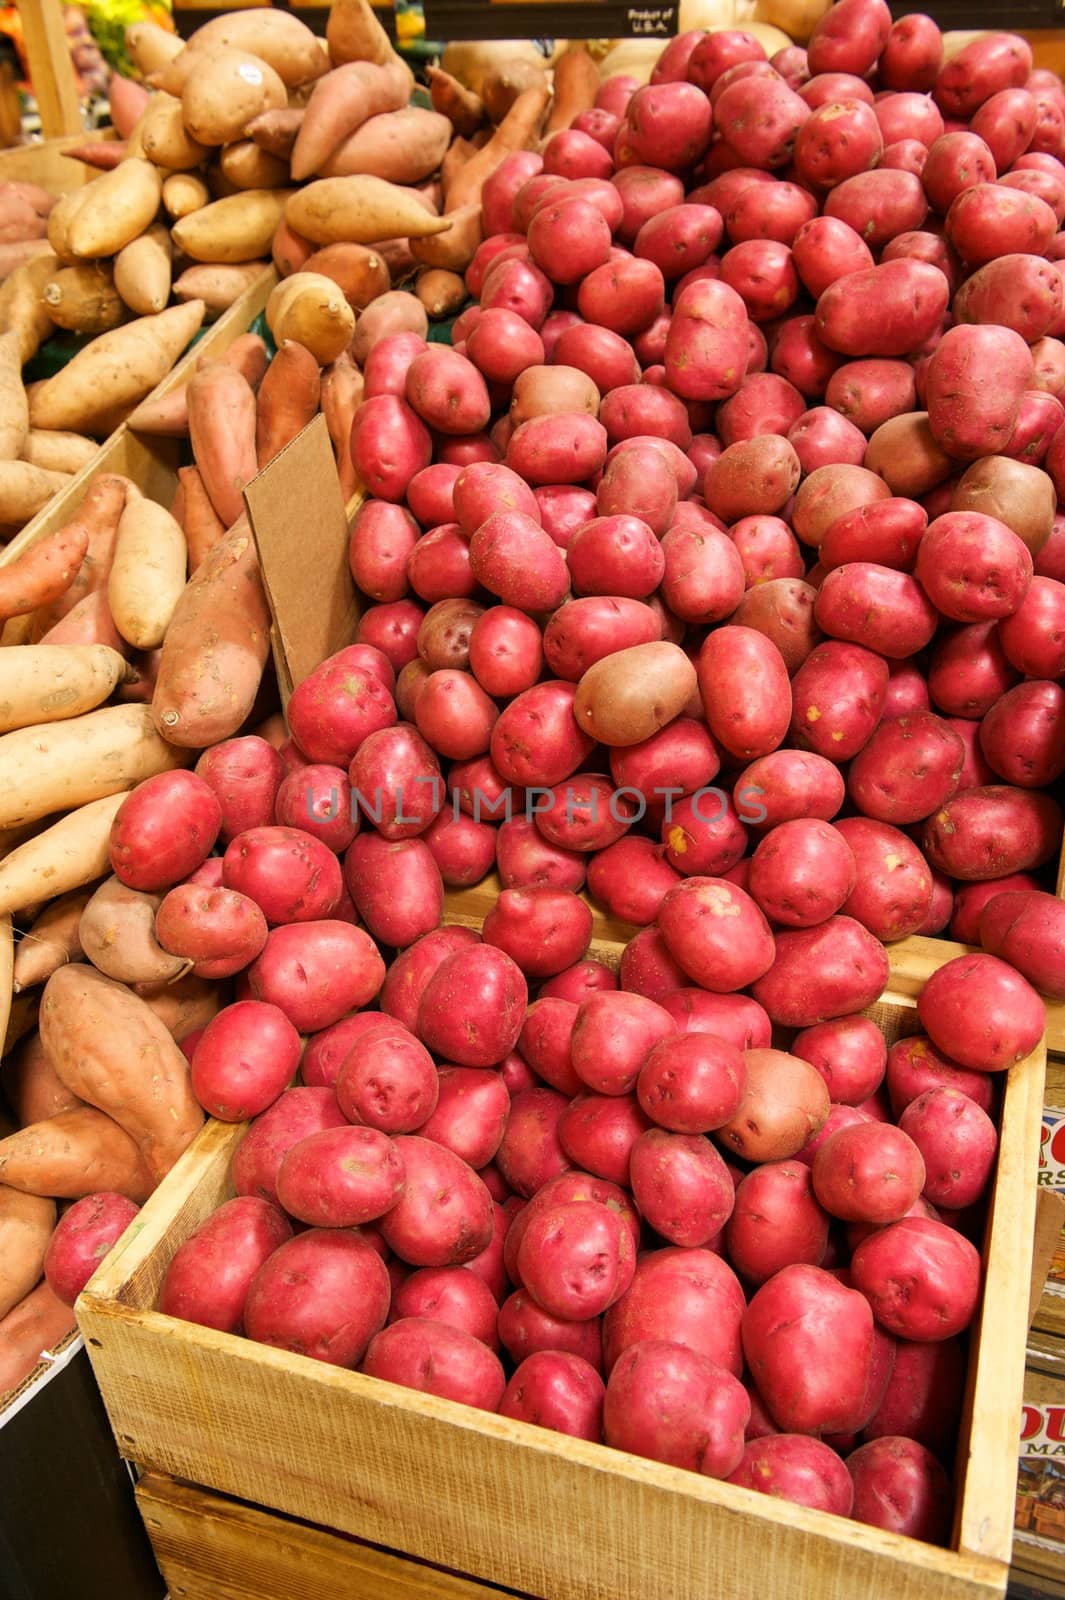 Grocery Store Crate Full of Red Potatoes by pixelsnap